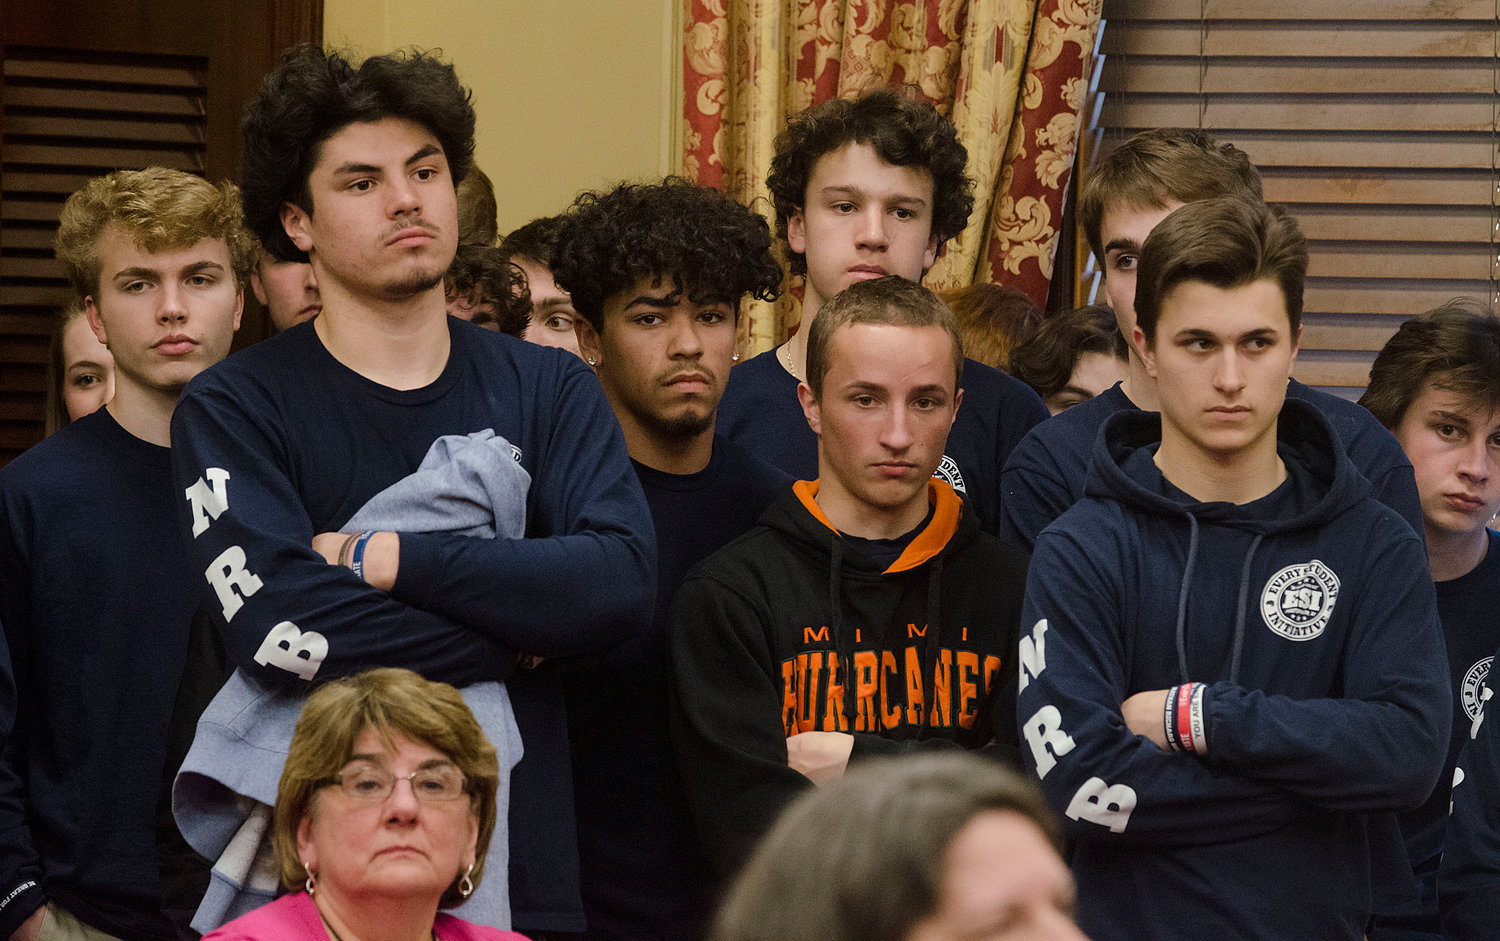 Members of Every Student Initiative, an advocacy group formed by Portsmouth High School students, crowd the Senate Committee on Education's hearing room at the State House Wednesday, March 20.